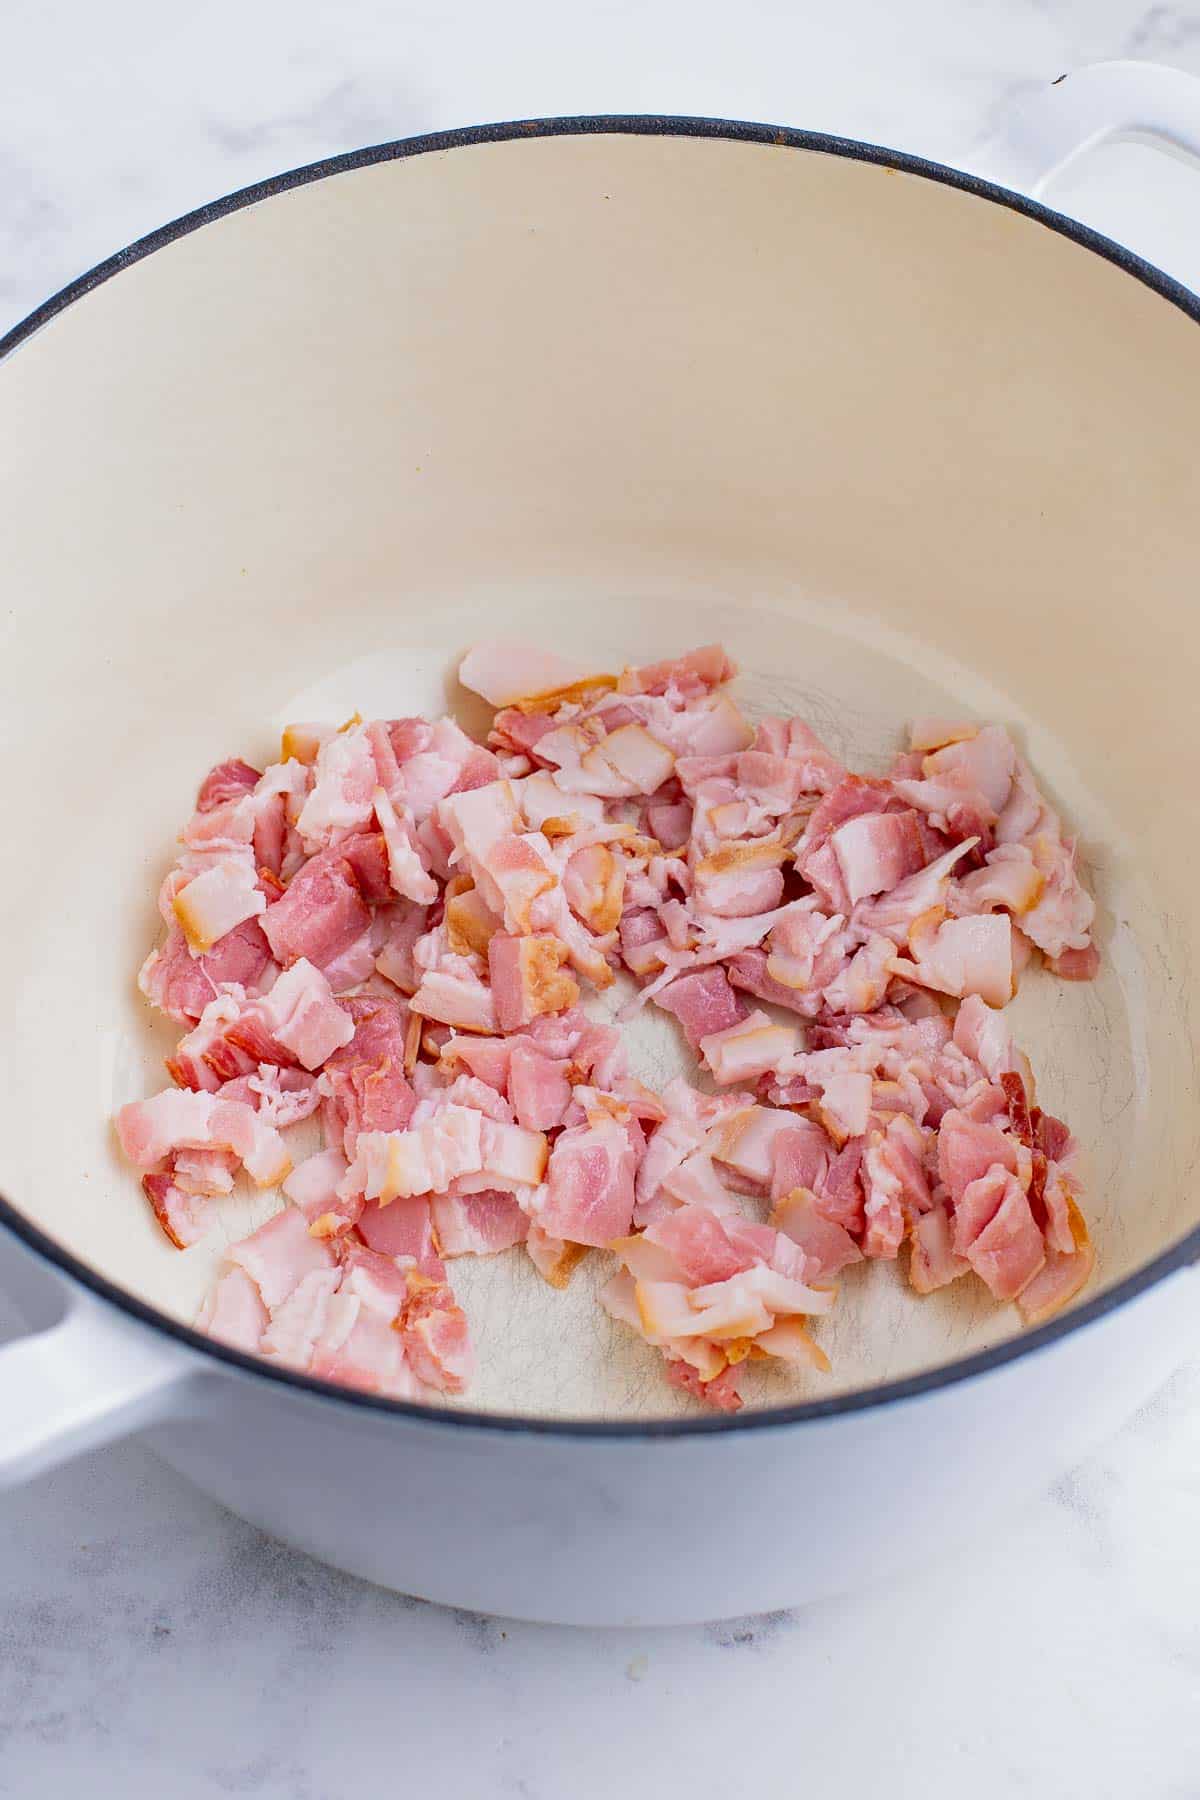 Bacon is cooked in a Dutch oven.